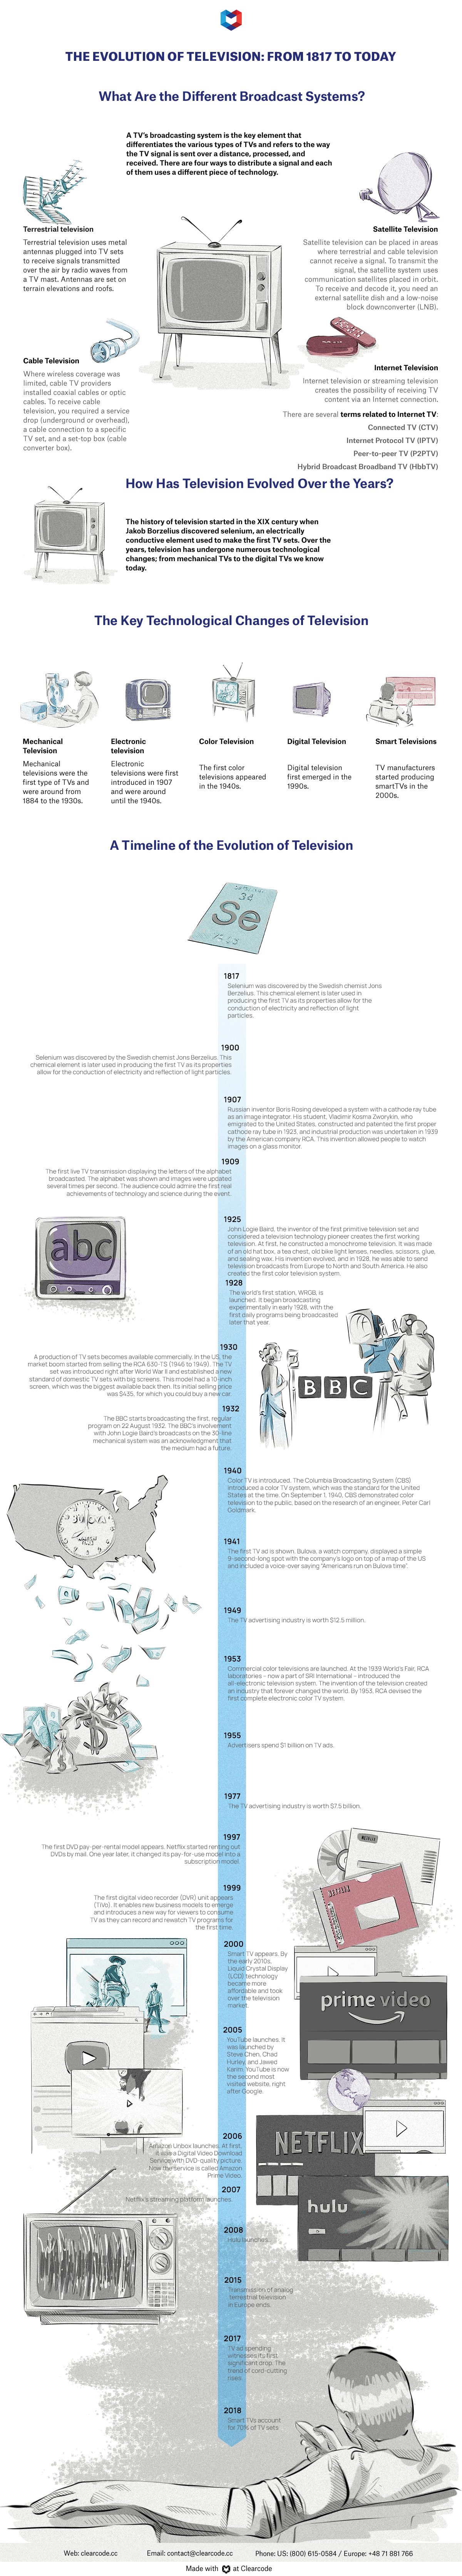 An infographic displaying a timeline of the evolution of television